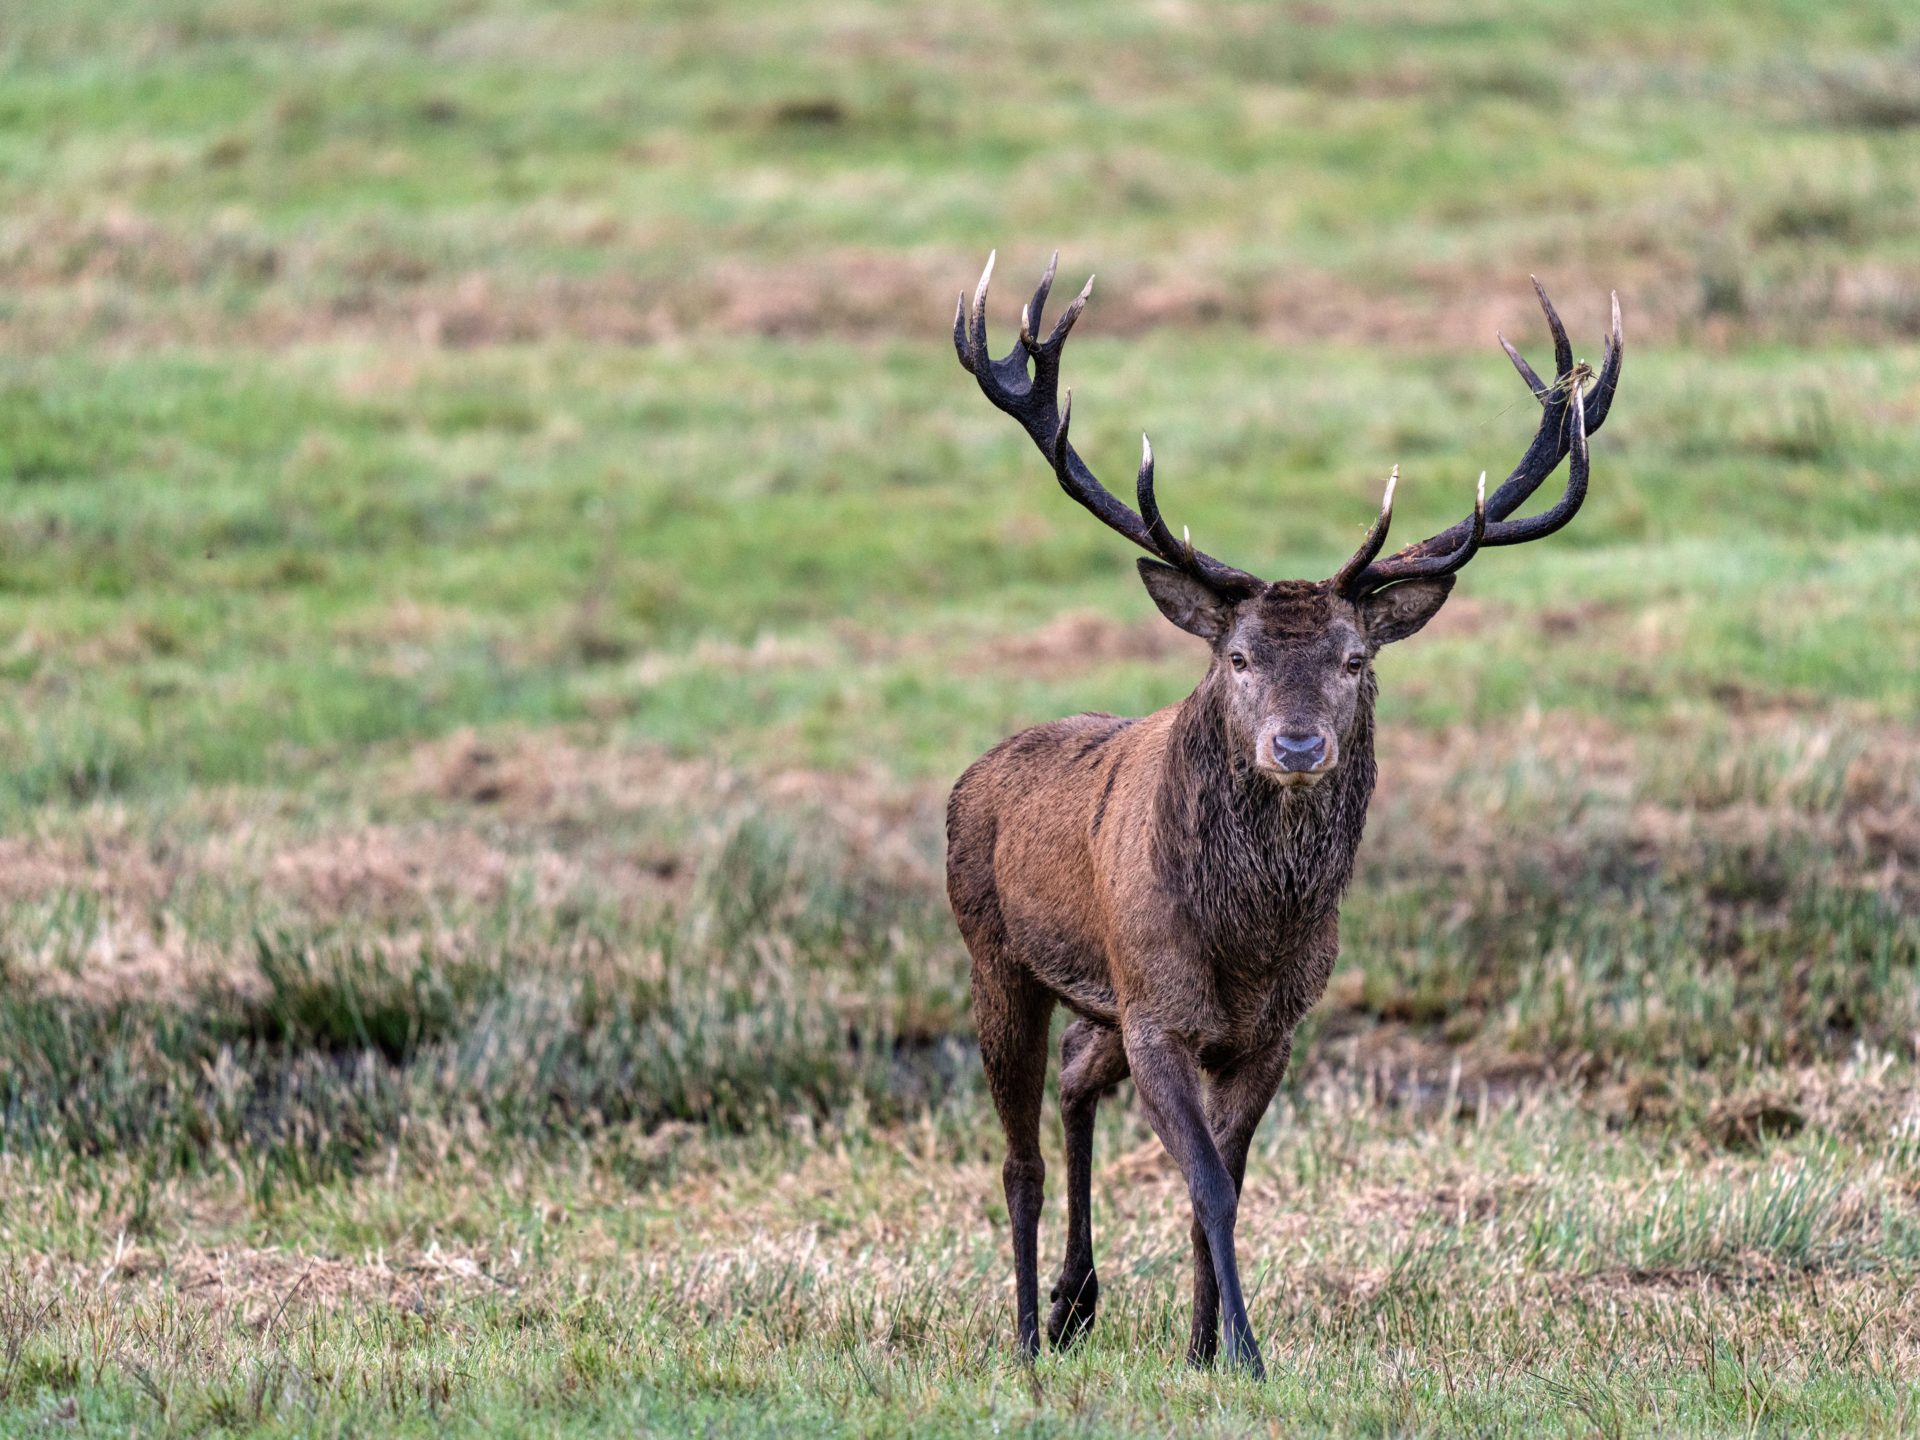 A Red Deer at Killarney National Park in County Kerry